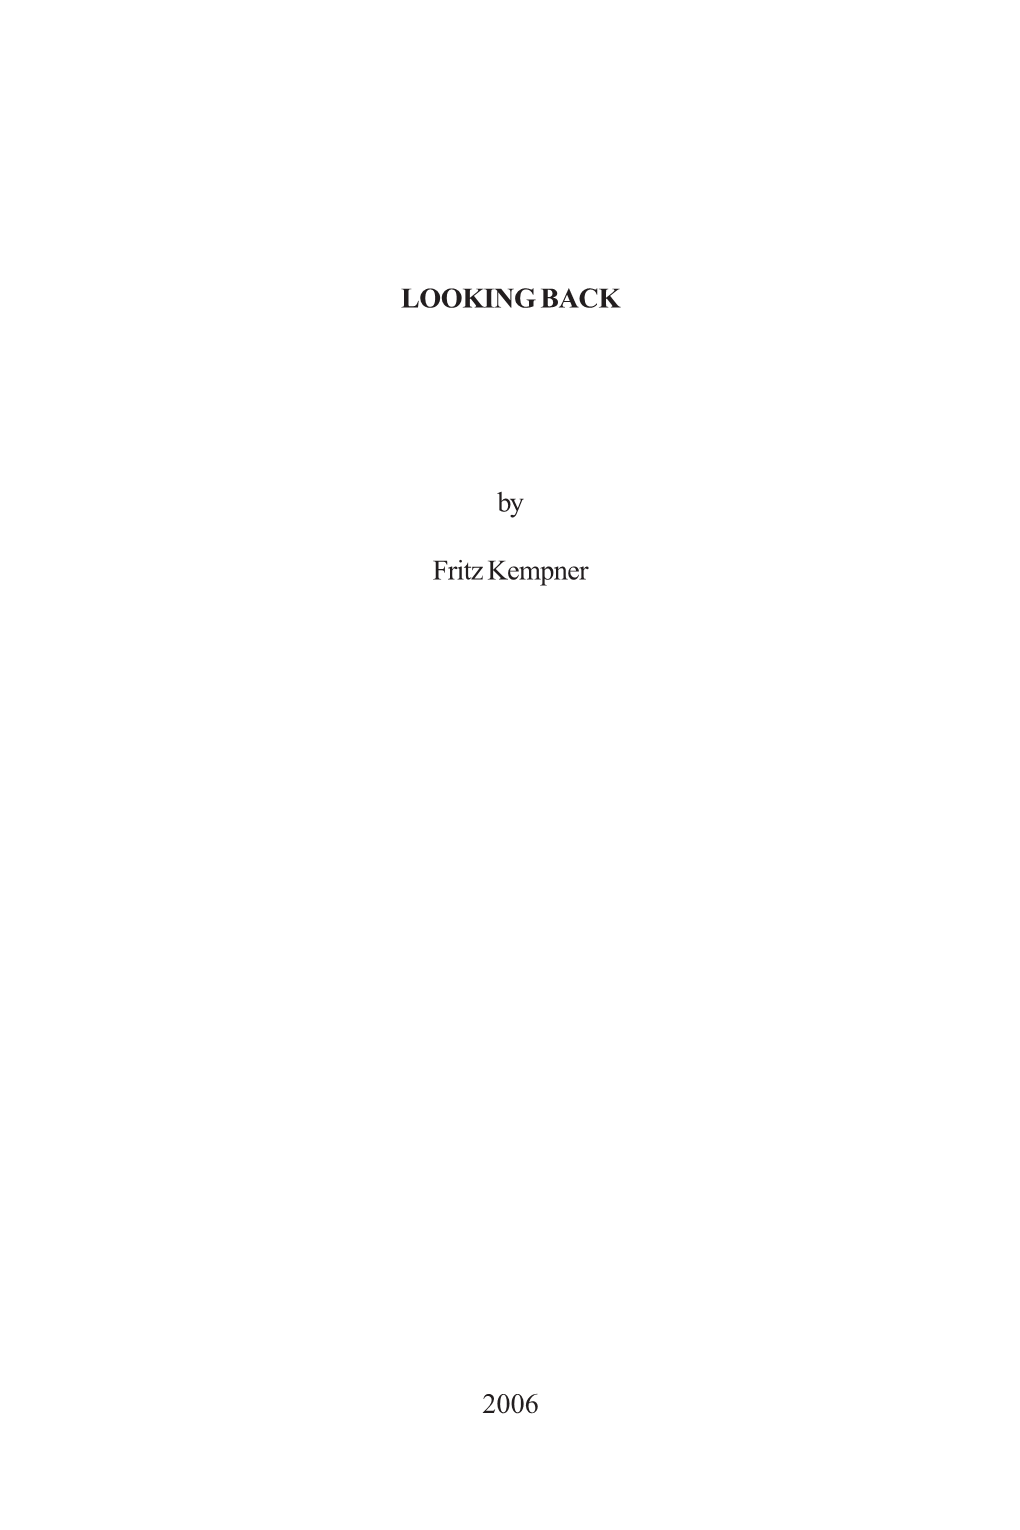 Looking Back, by Fritz Kempner